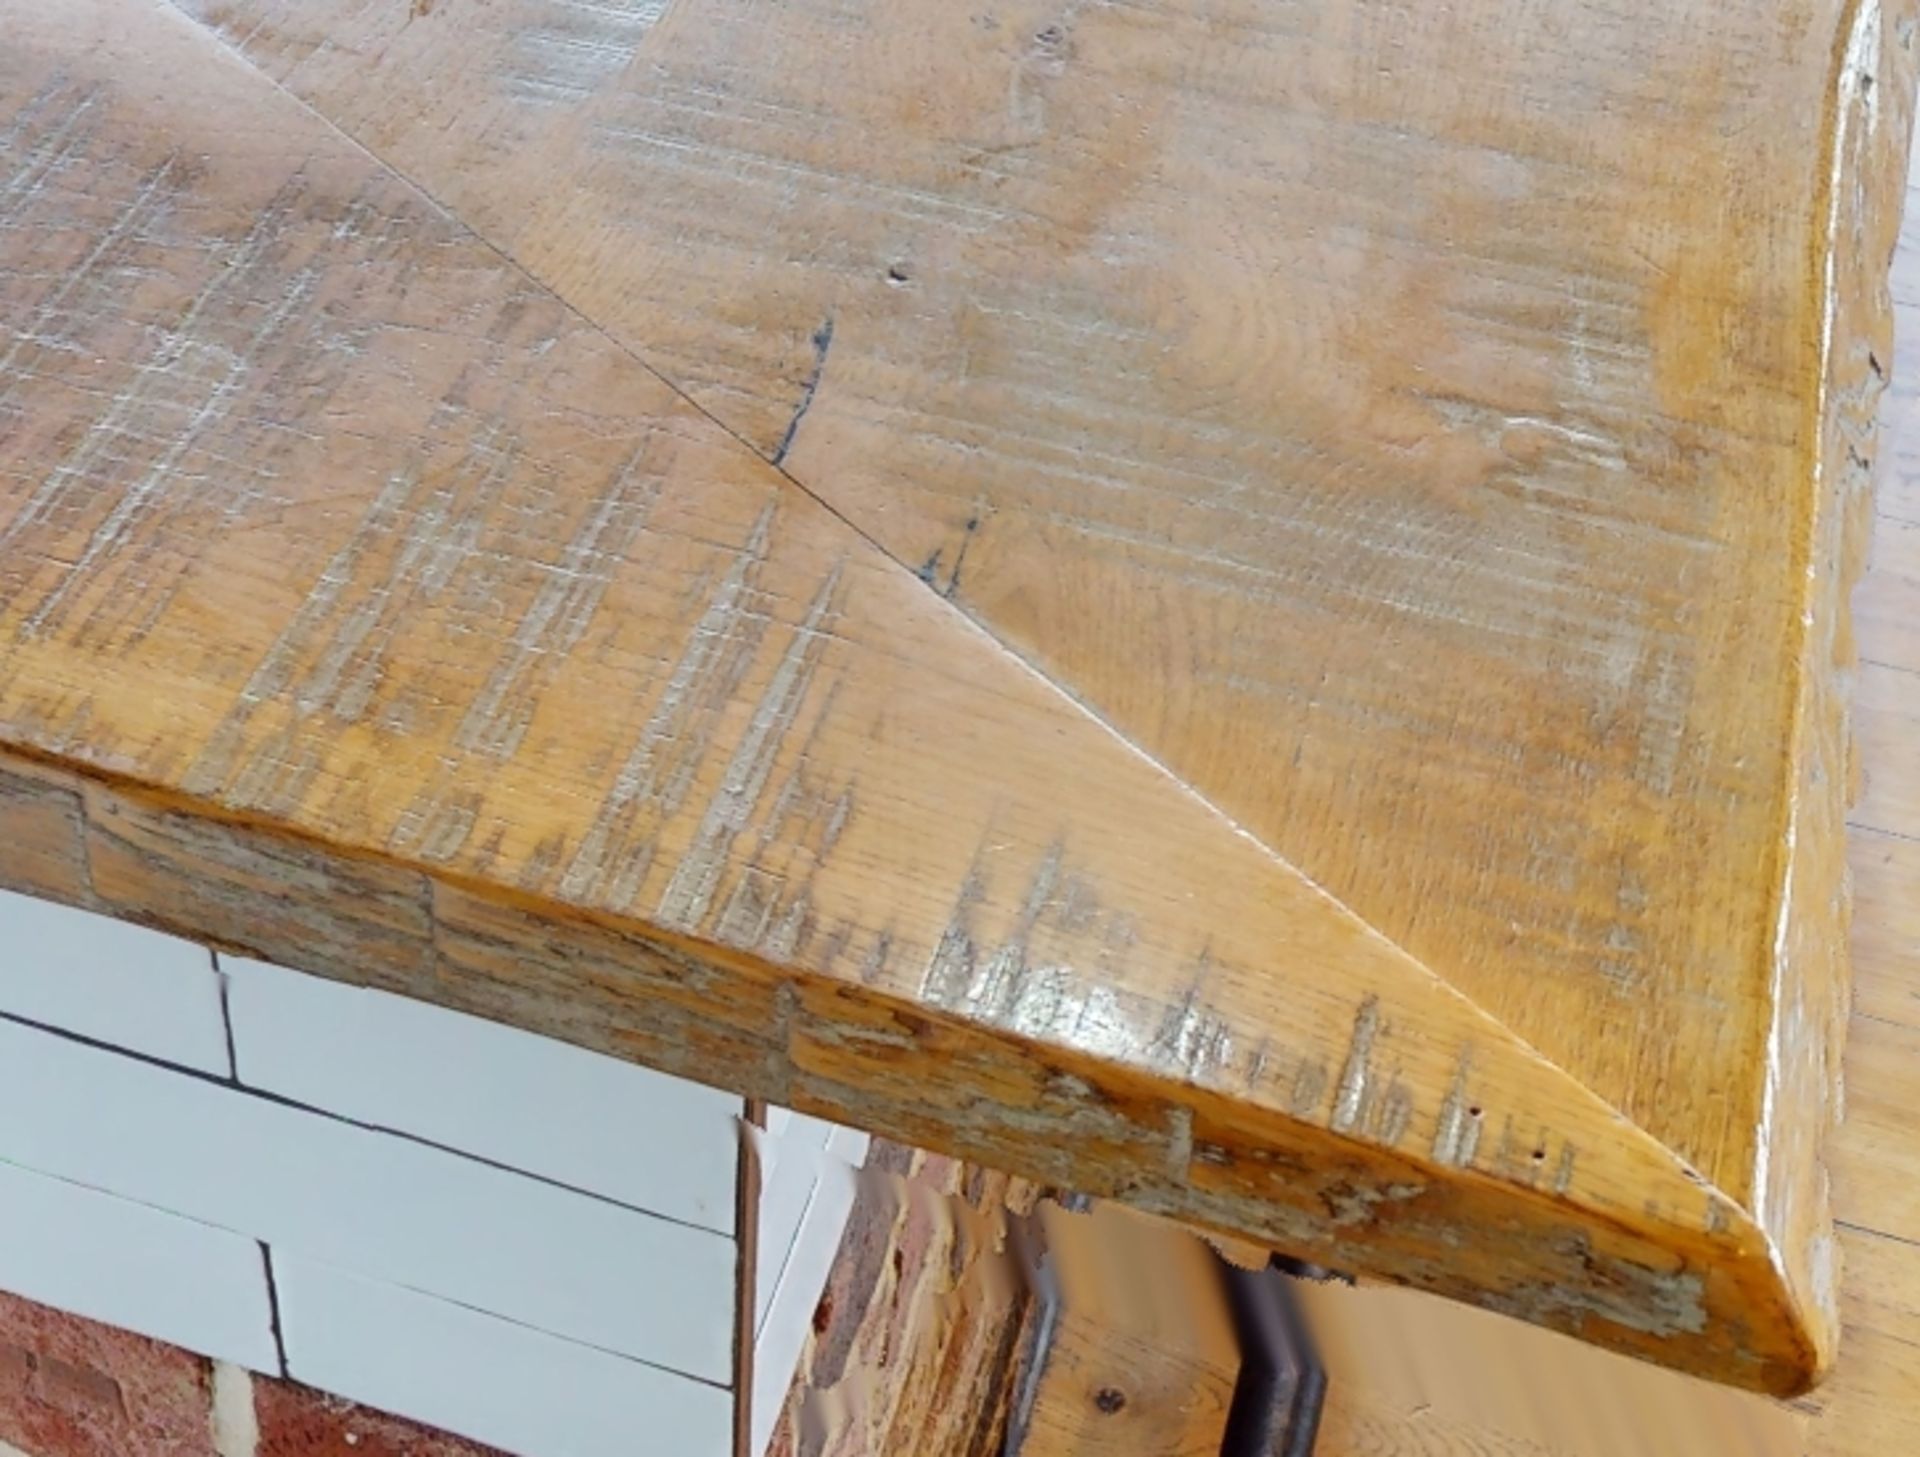 1 x Rustic Knotty Oak L Shaped Bar Top With an Earthy Finish and Live Edge - Approx 22ft in Legth! - Image 9 of 16